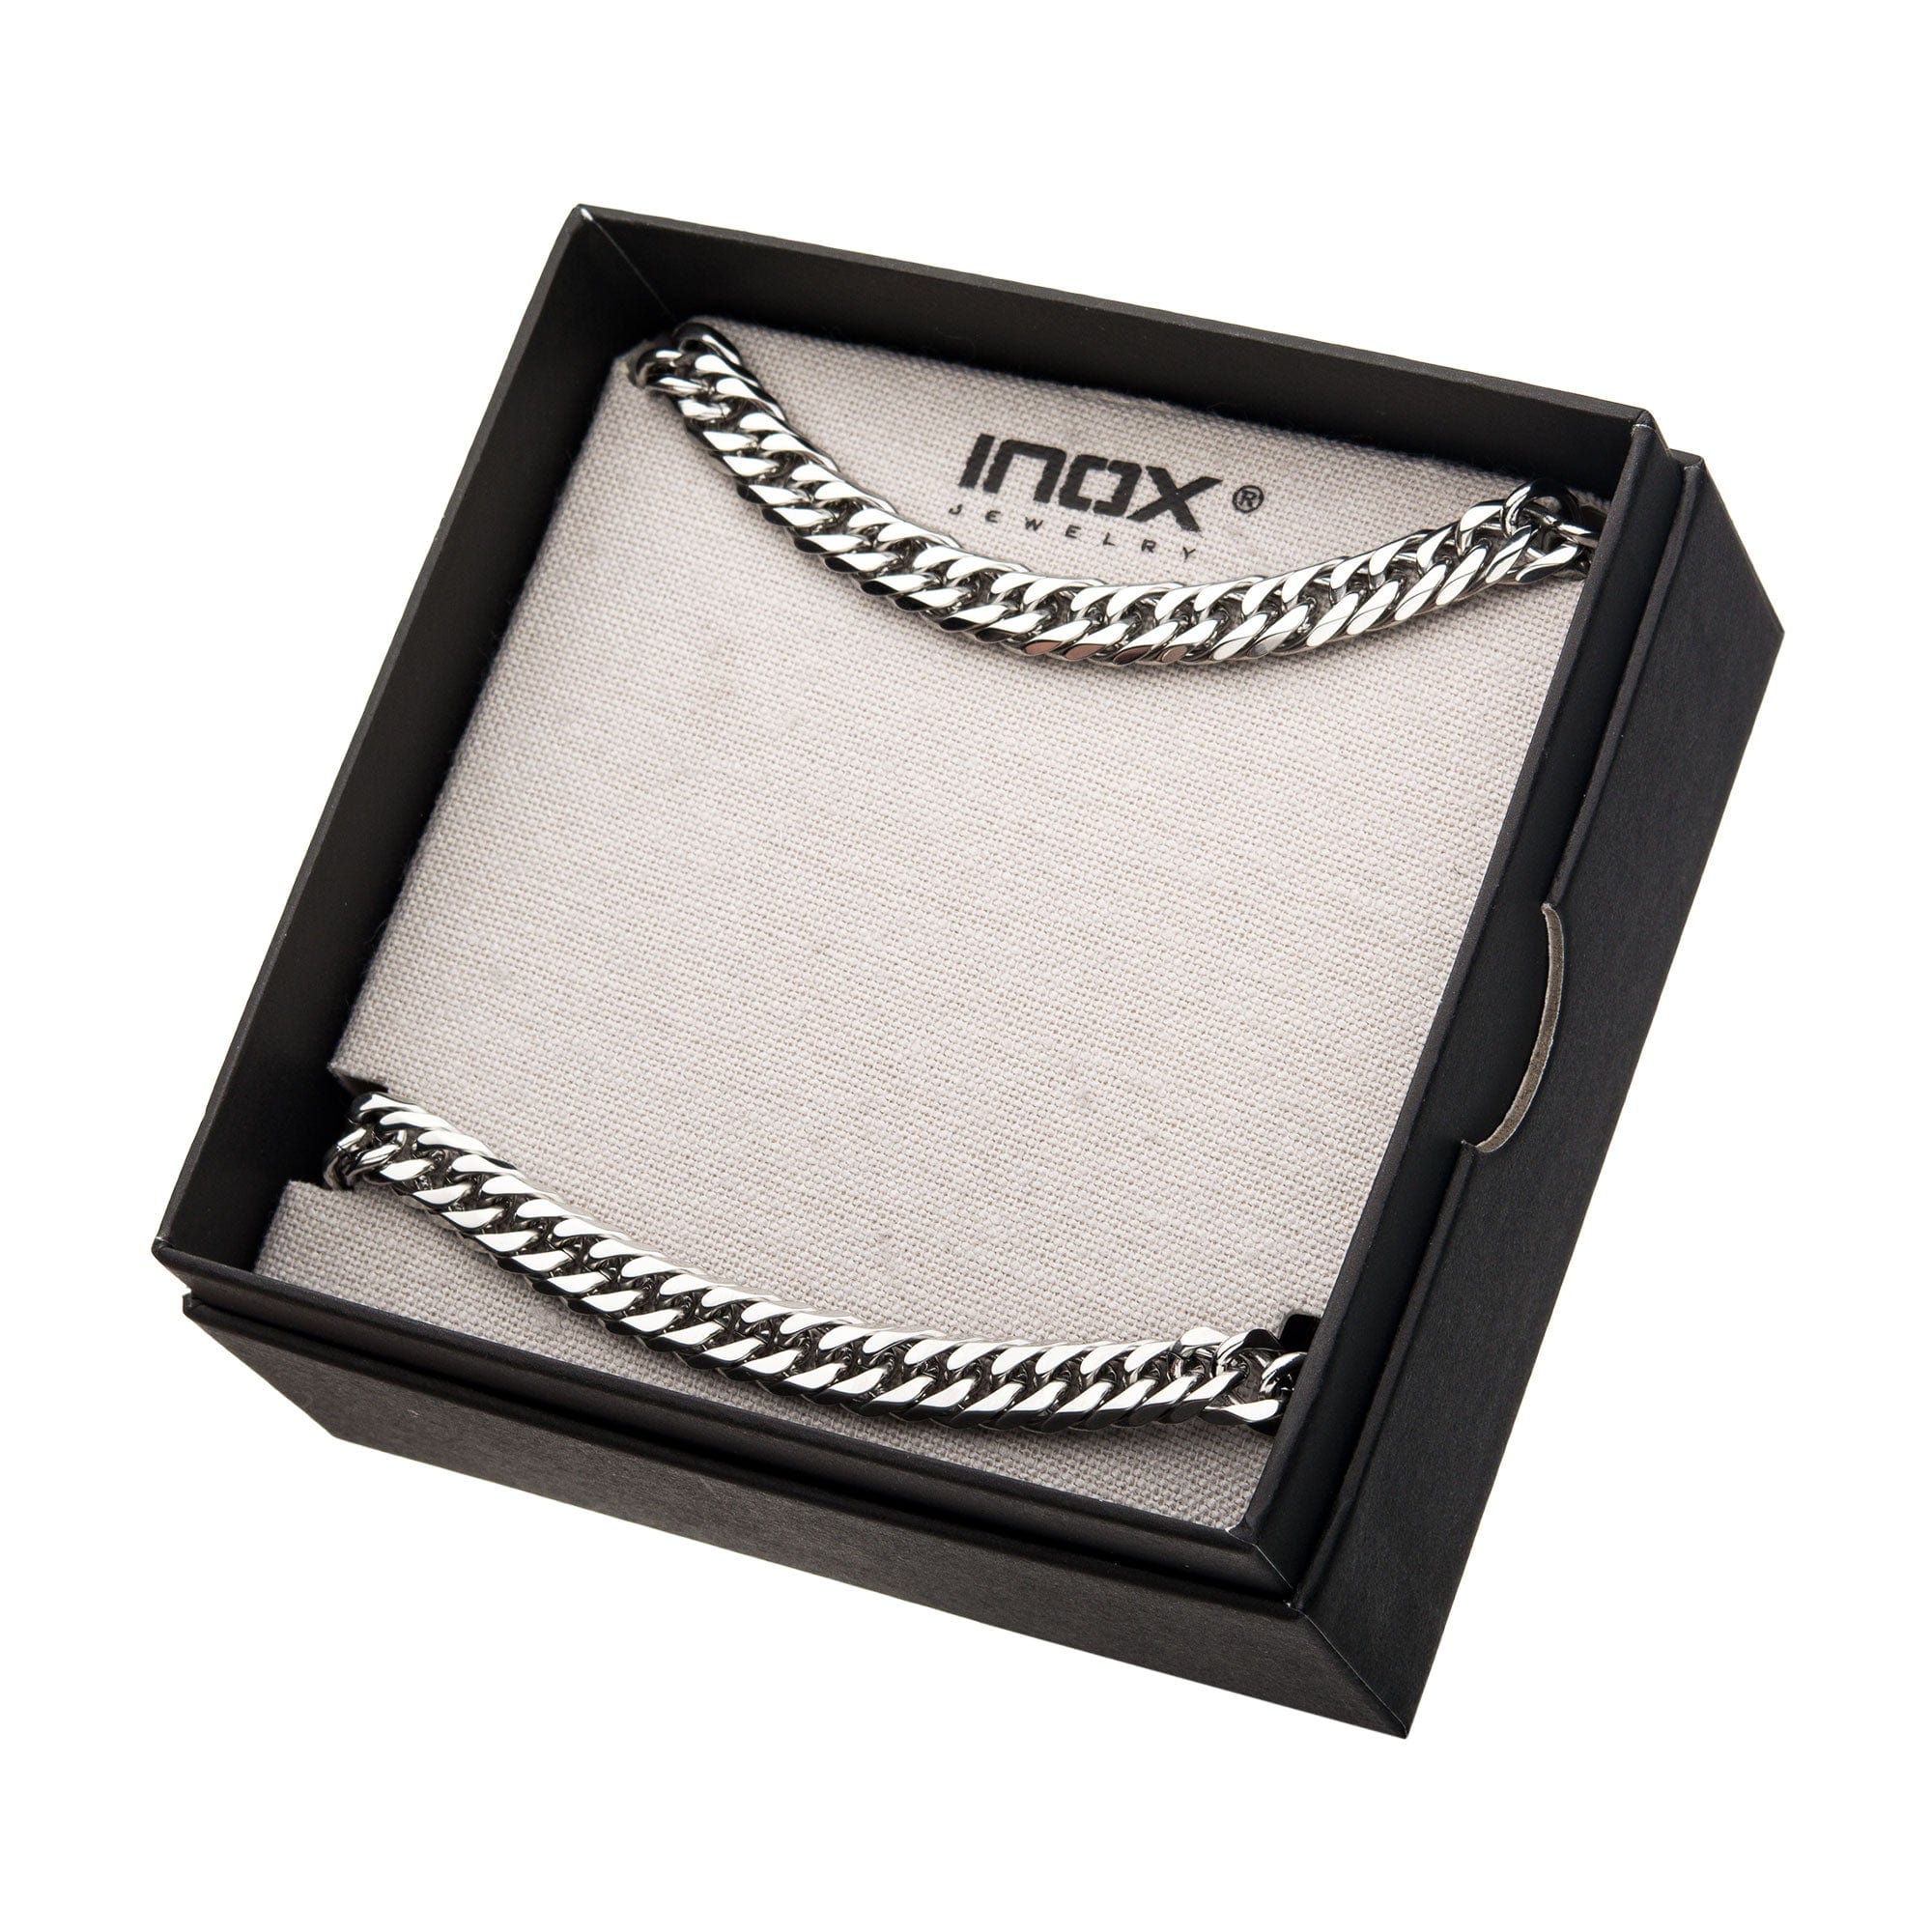 INOX JEWELRY Chains Silver Tone Stainless Steel Double Curb Chain and Bracelet Set NSTC0510-SET